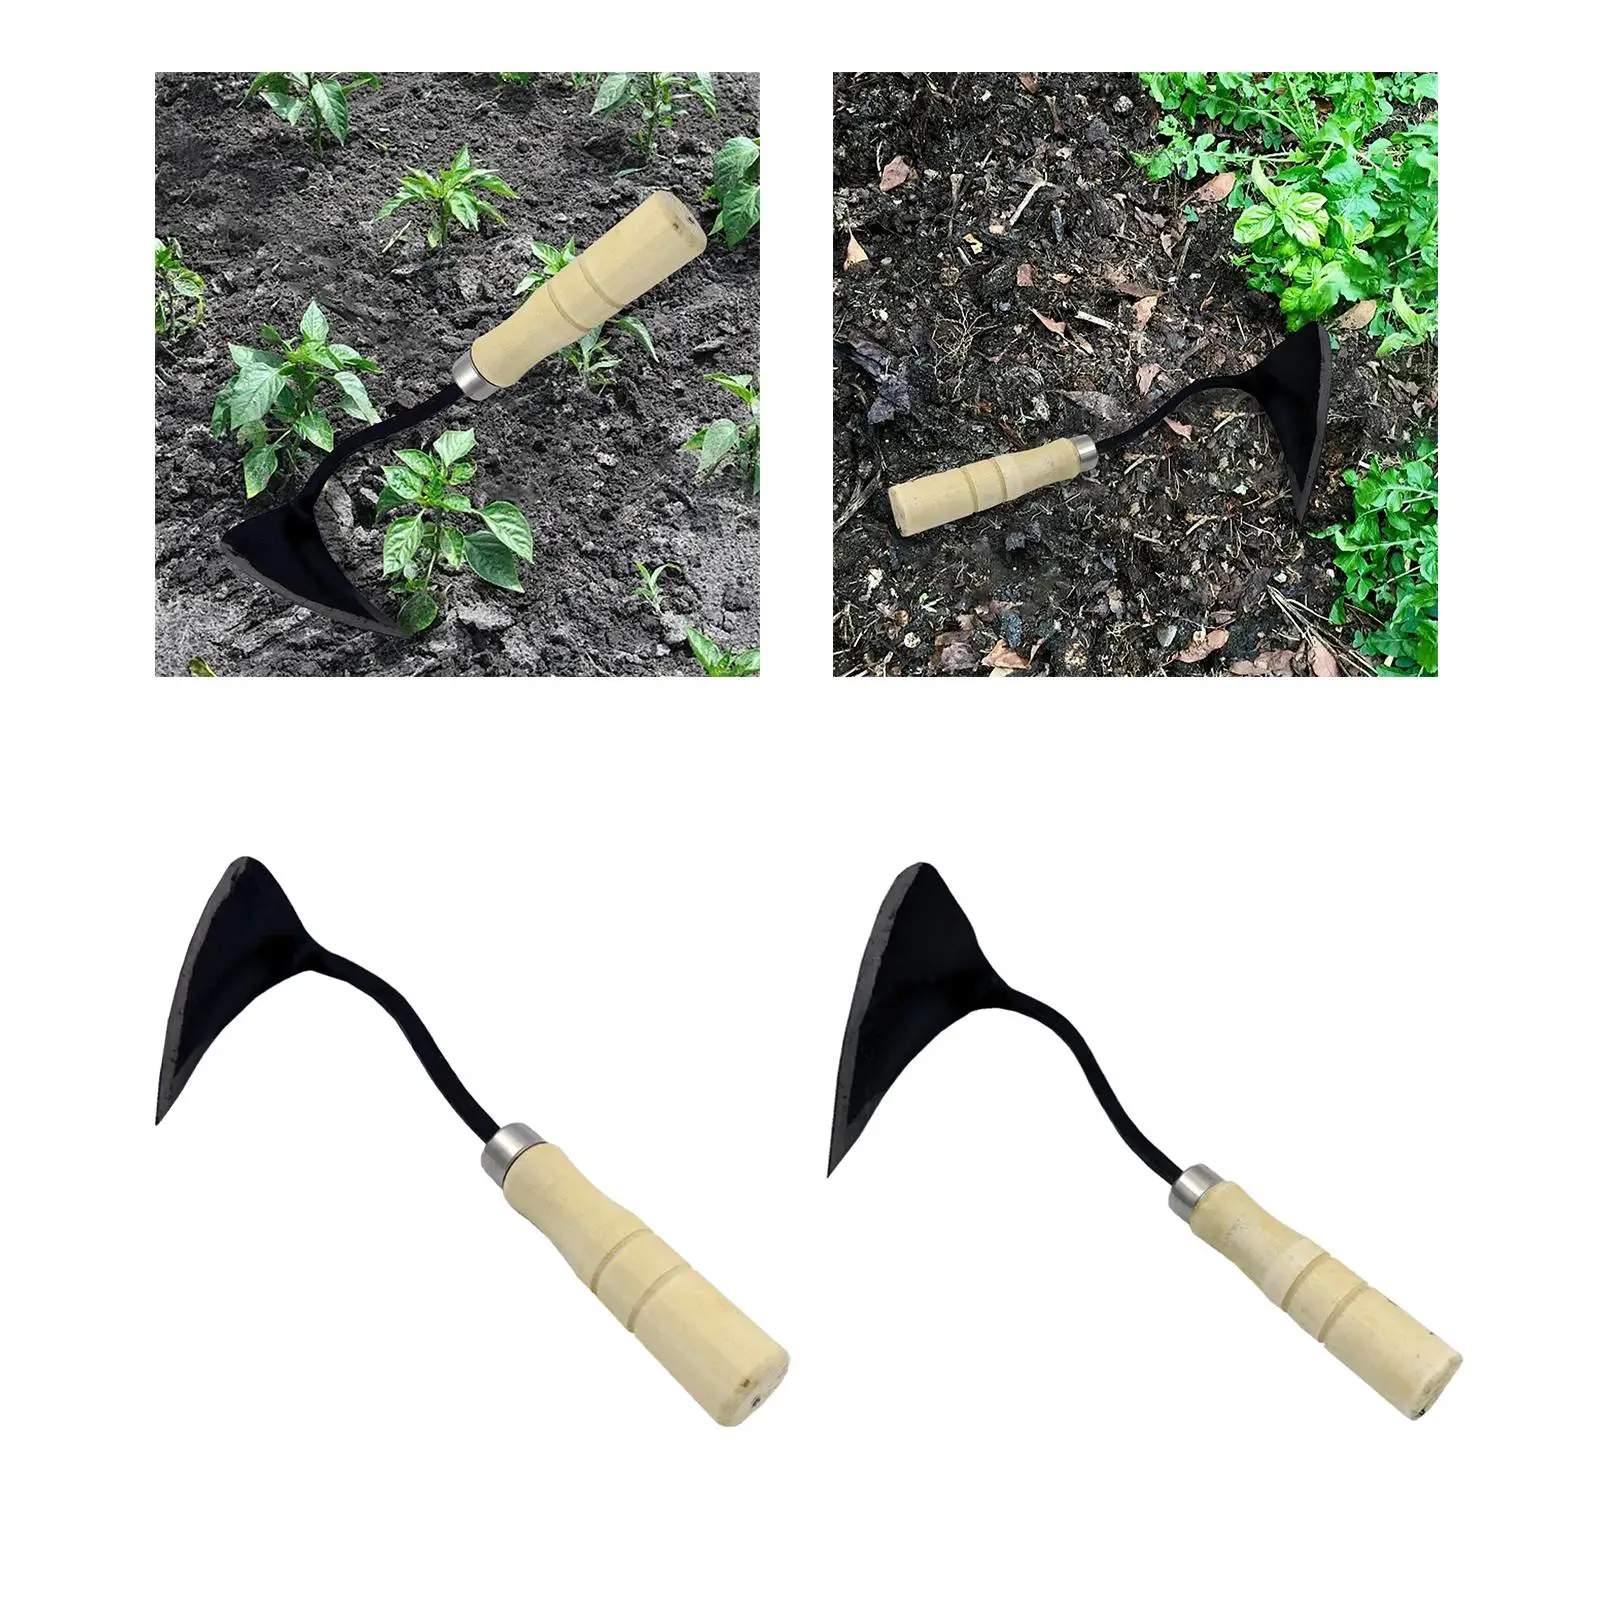 Gardening Plow Hoe Sharp Weeds Removal Tool for Lawn Weeding Planting